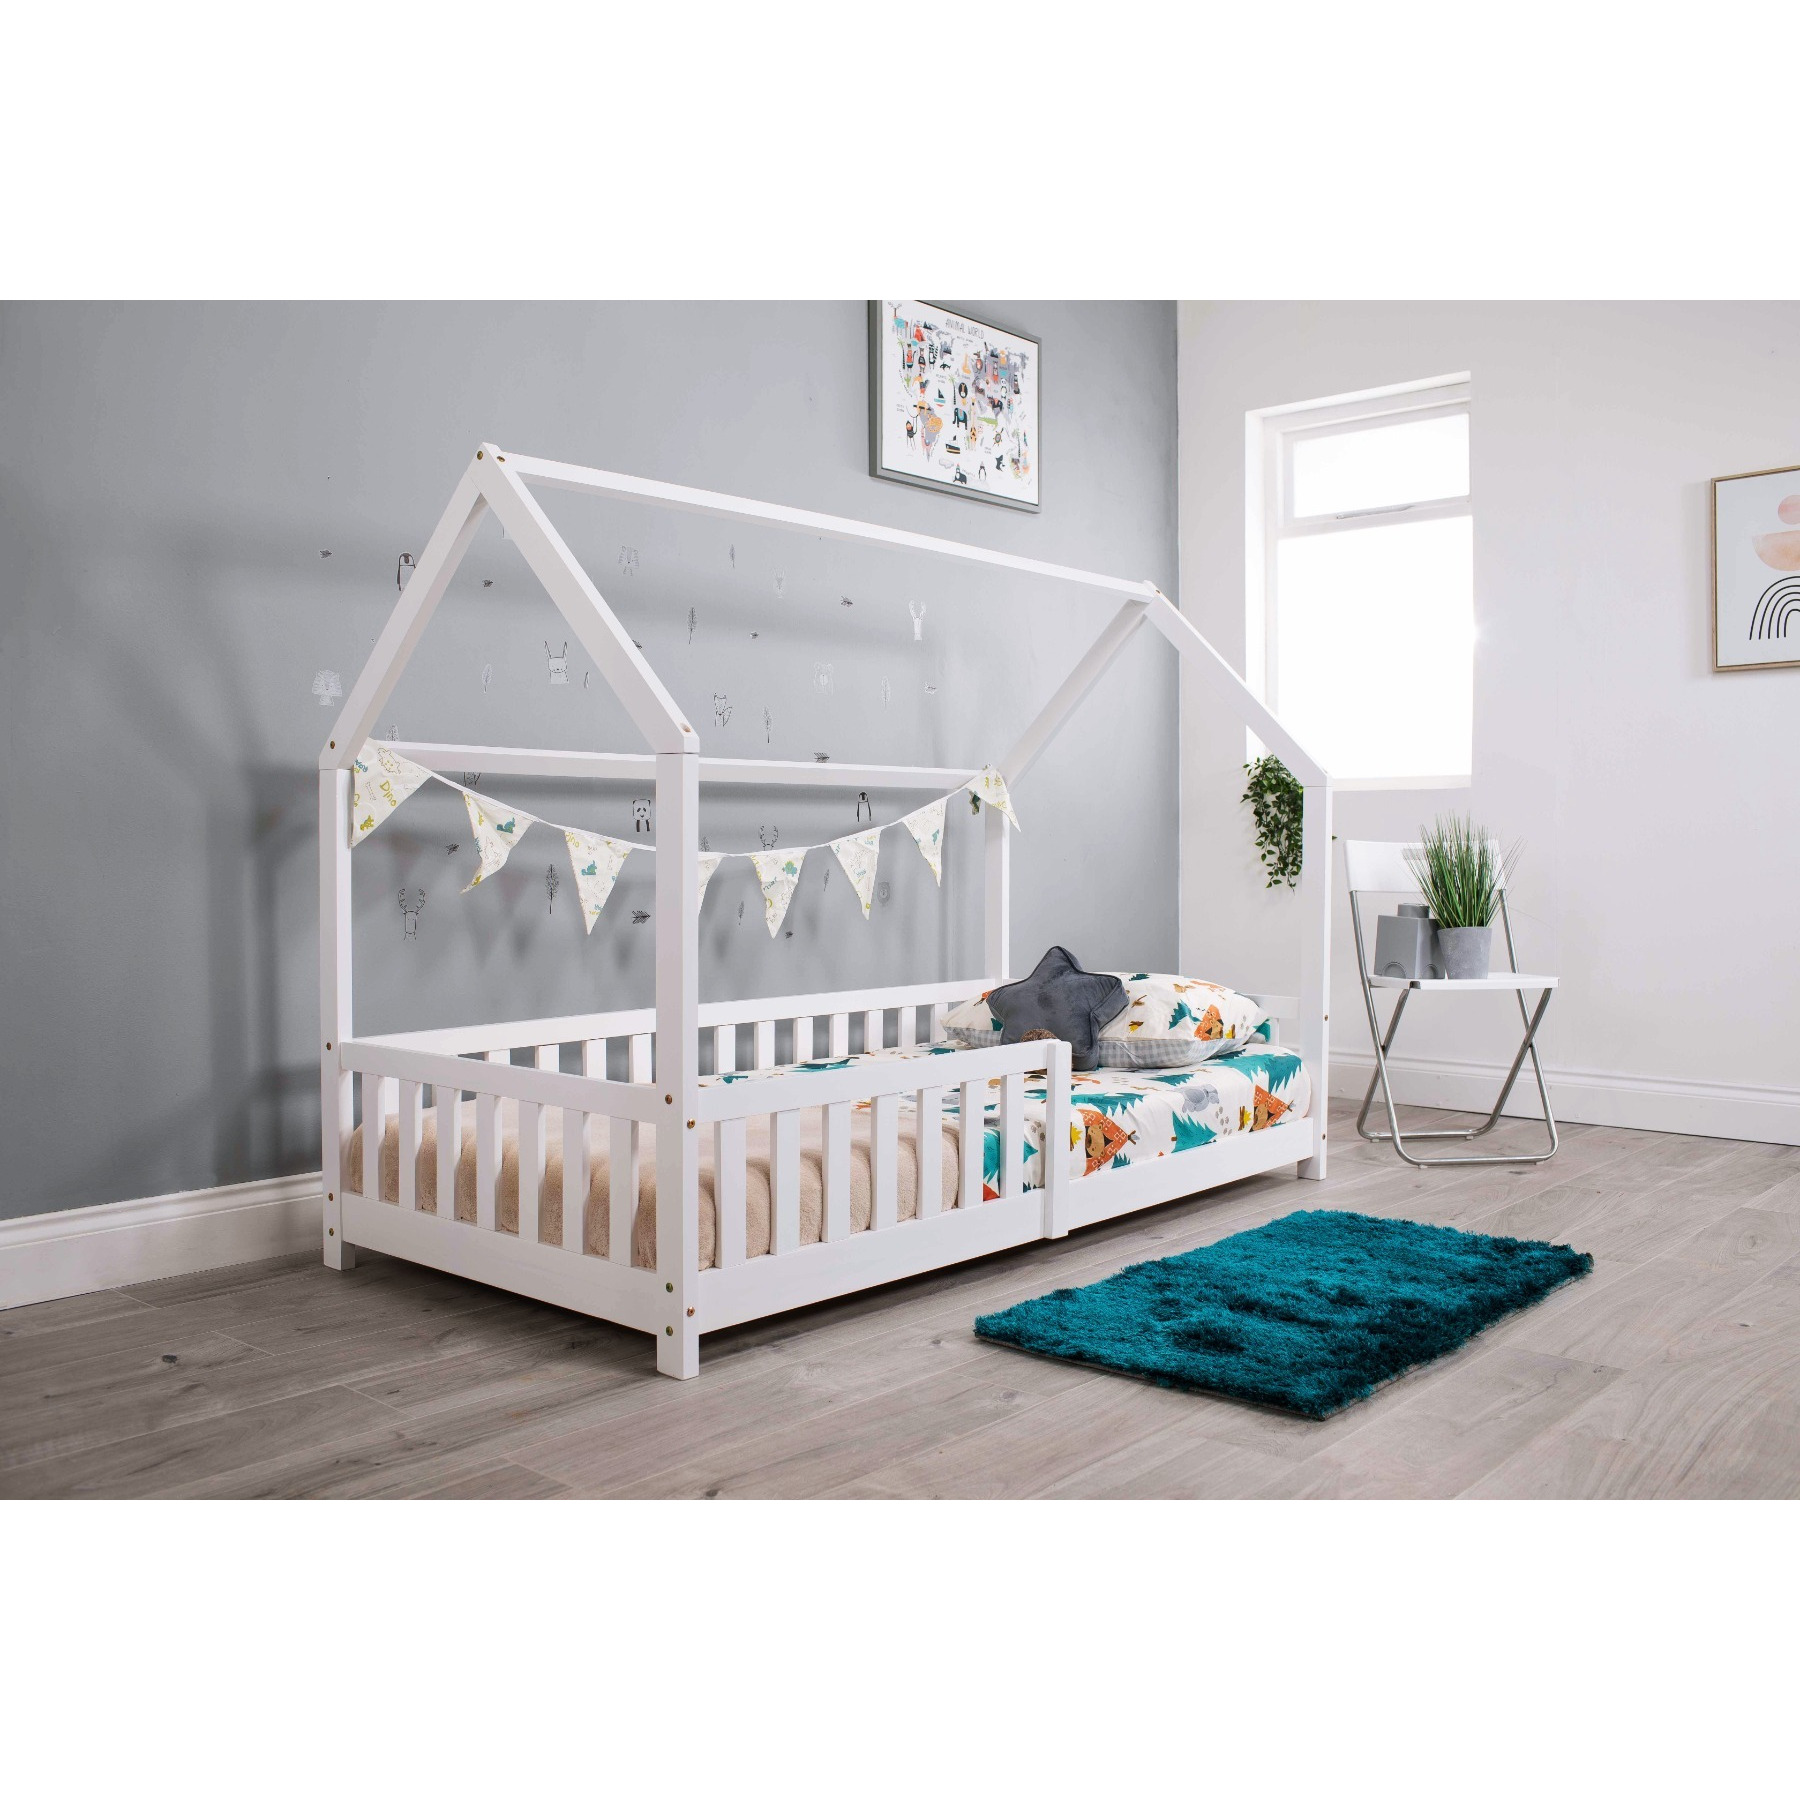 Flair White Wooden Explorer Playhouse Bed With Rails - image 1